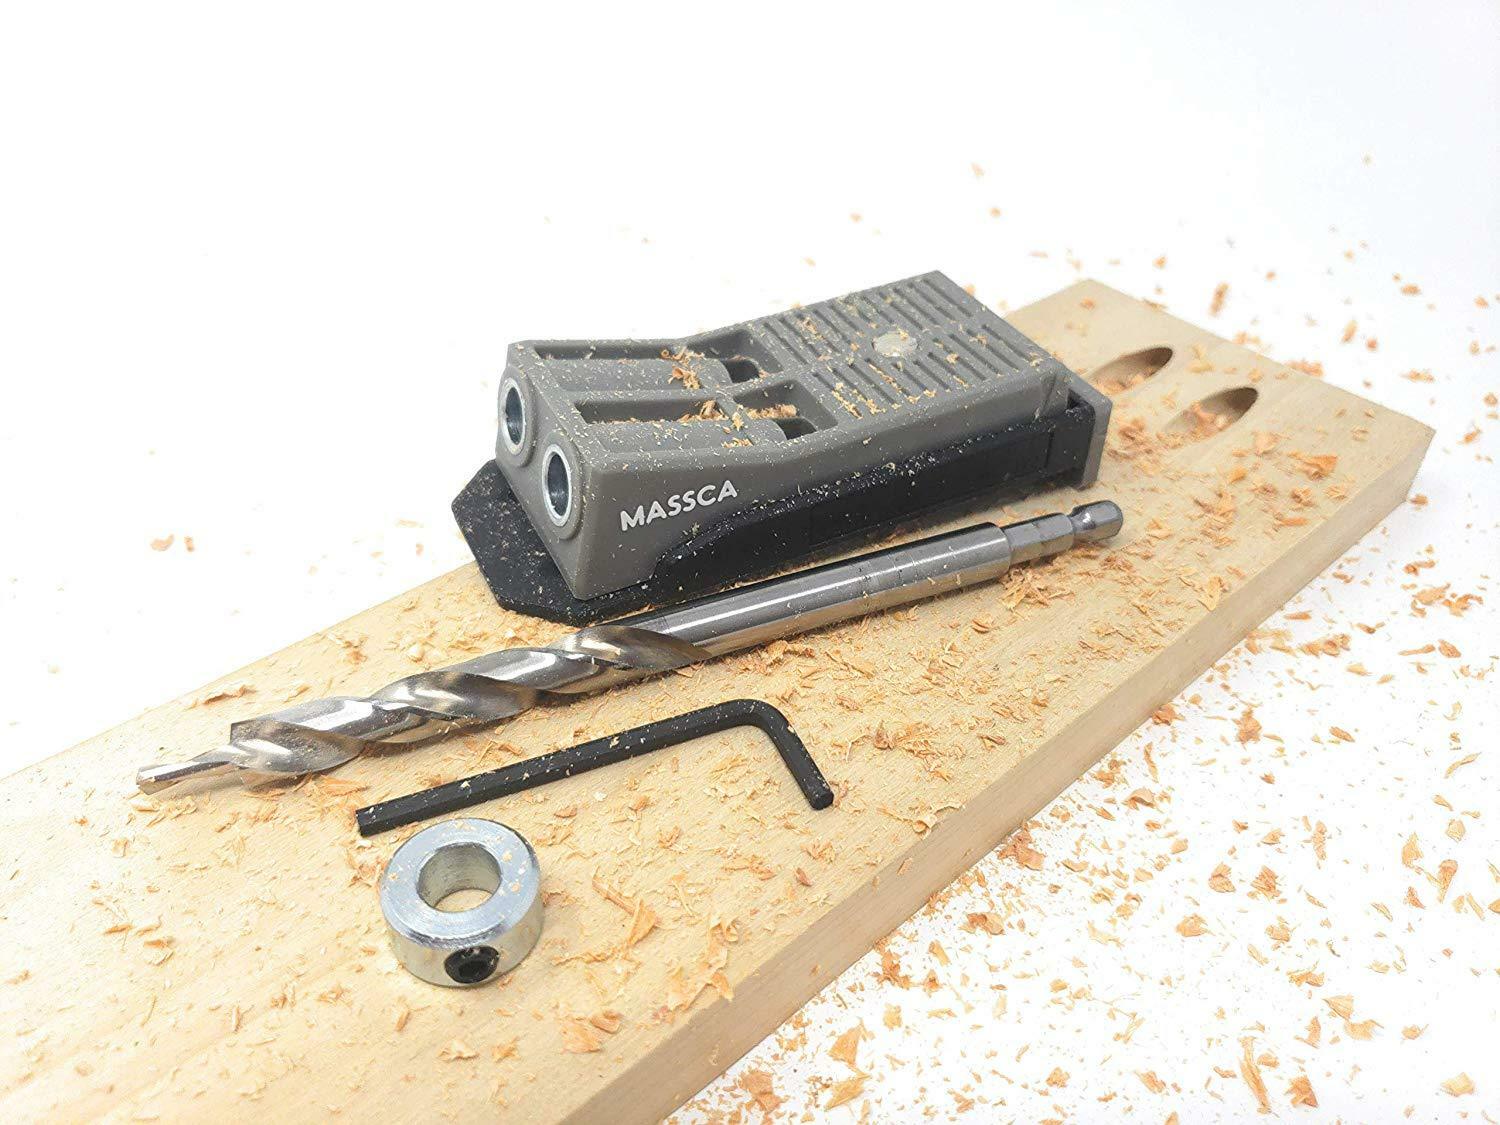 Pocket Hole Jig Set System. Drill Bit,stop Collar And Hex Key Included.